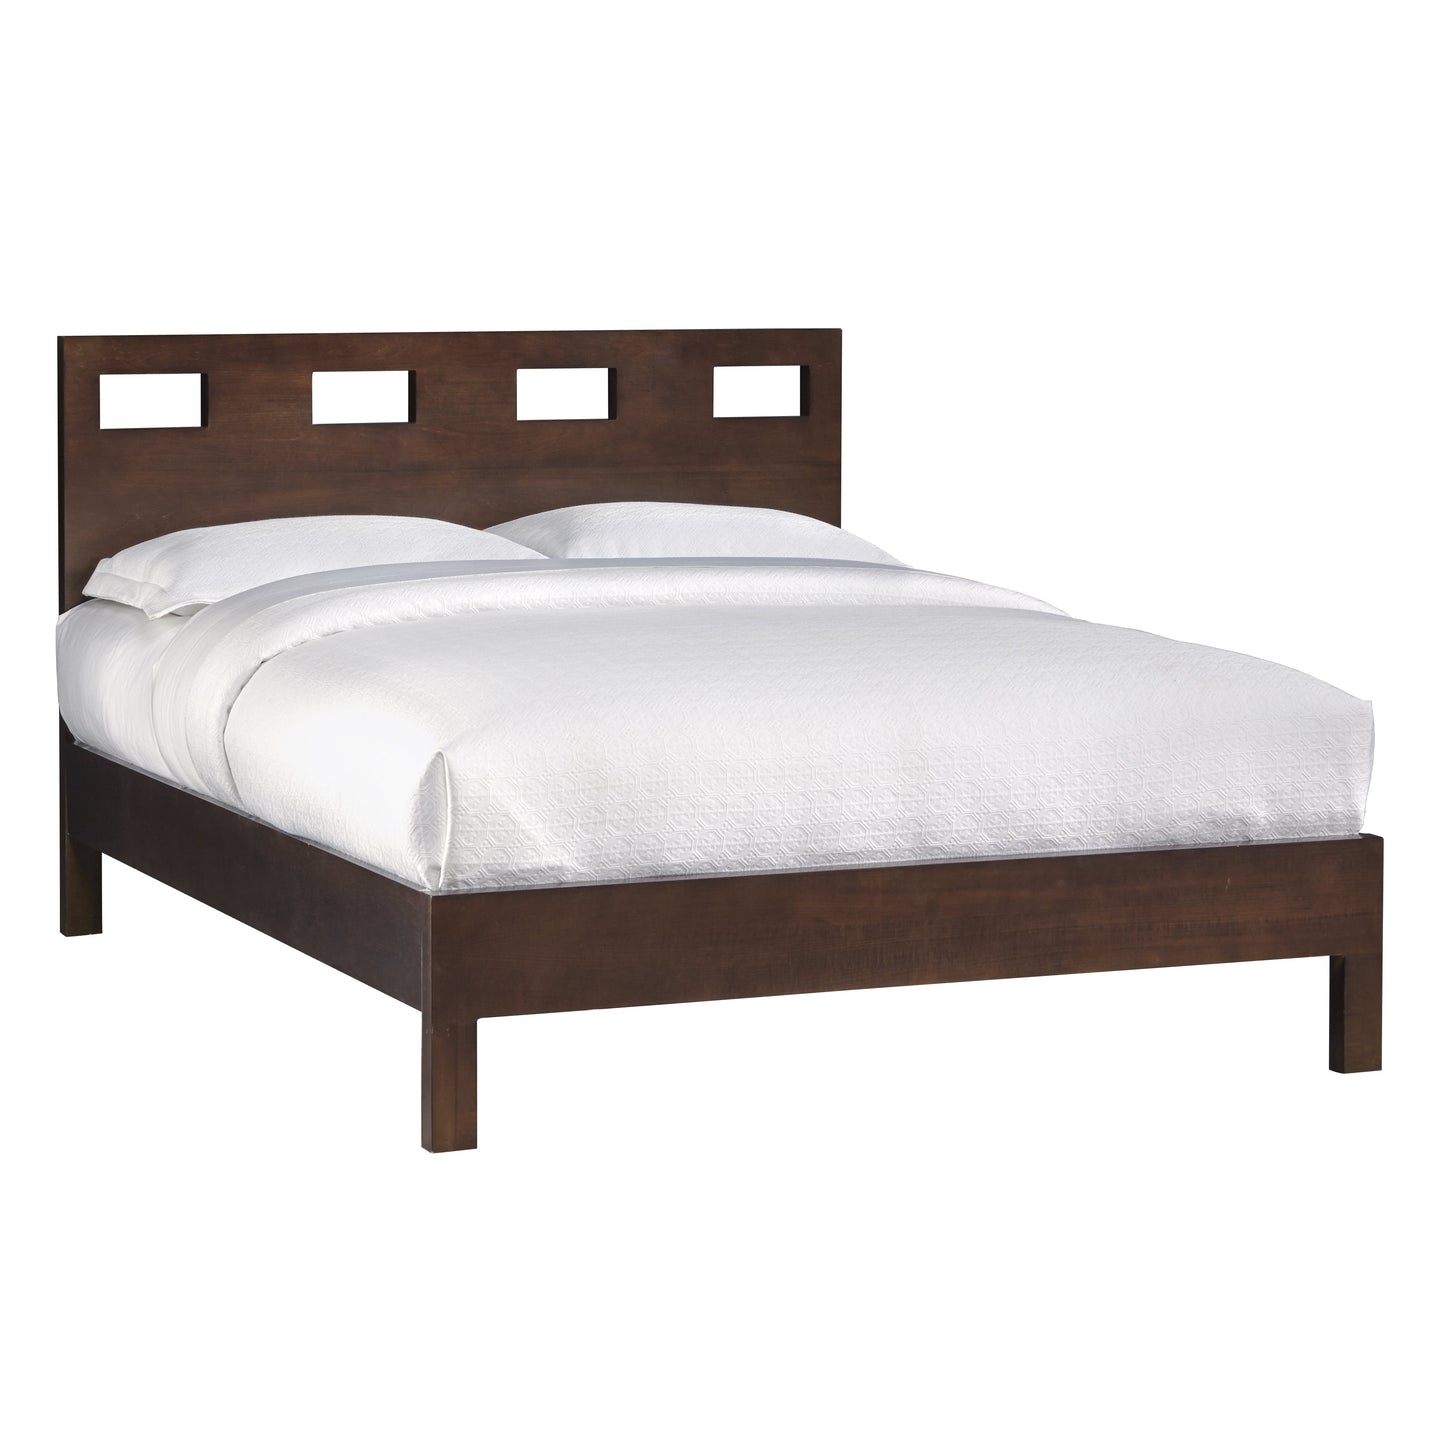 Modus Riva 6PC Cal King Bed Platform Bedroom Set in Chocolate Brown